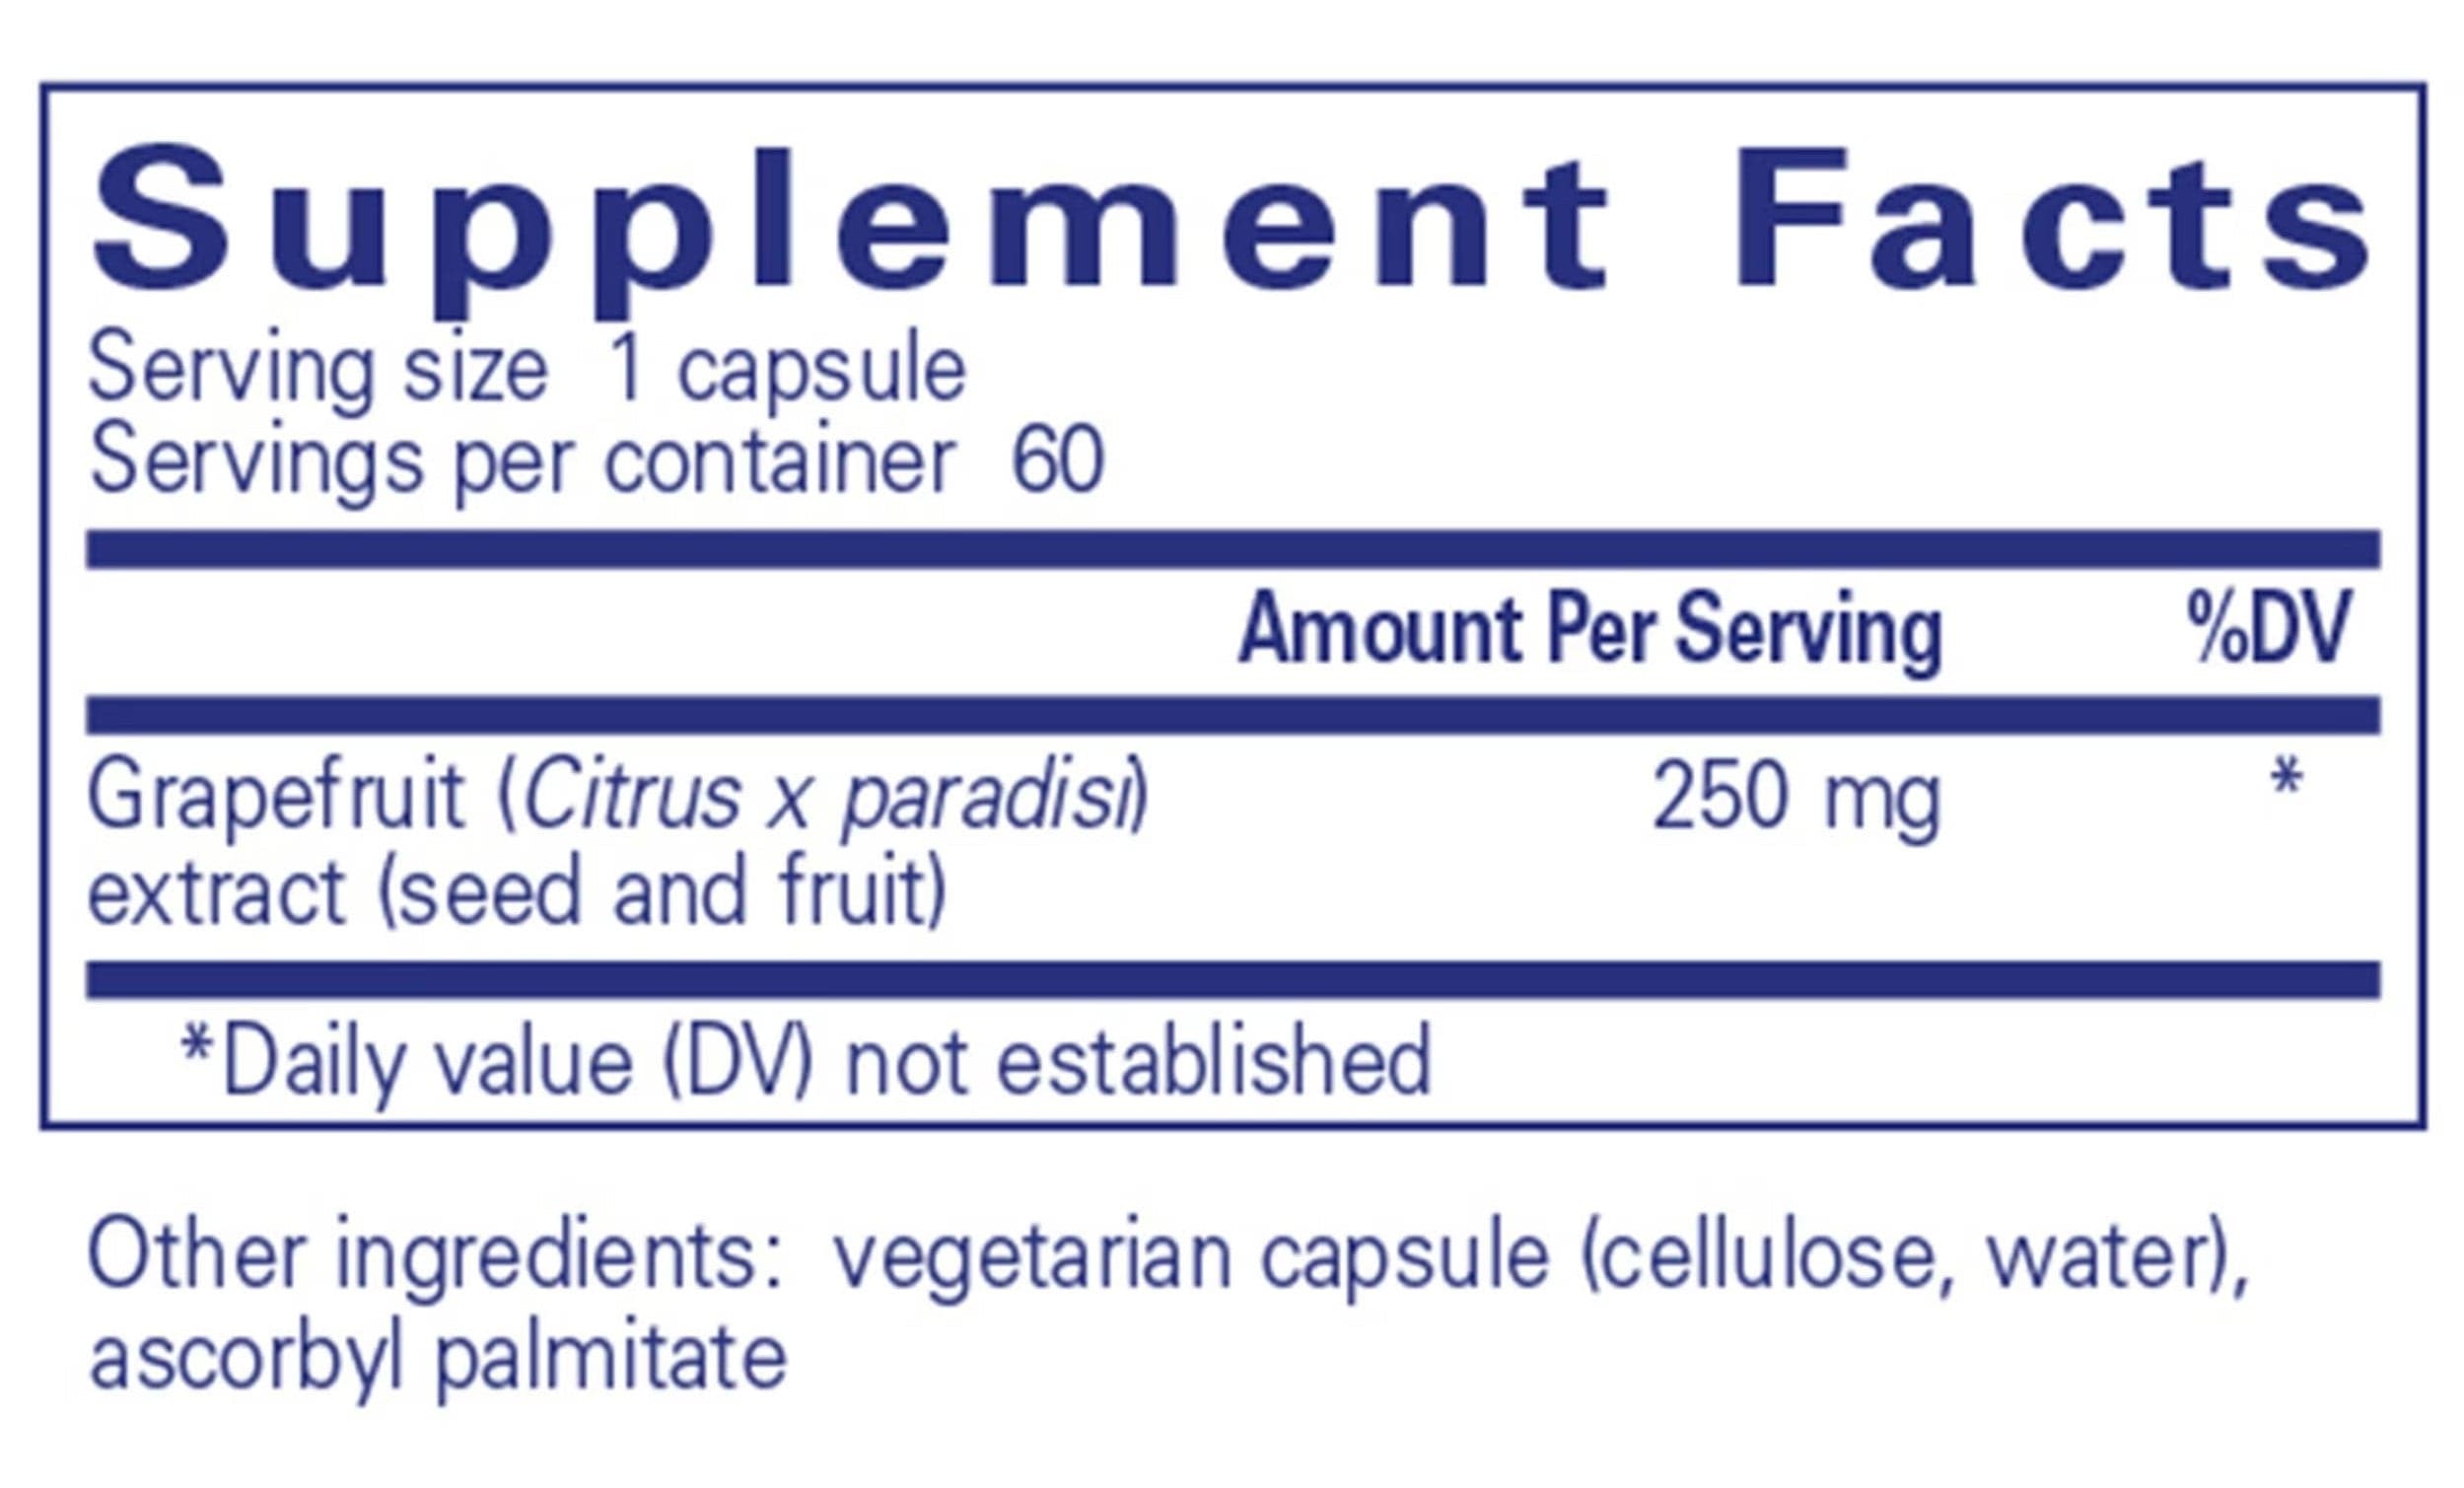 Pure Encapsulations Grapefruit Seed Extract Ingredients